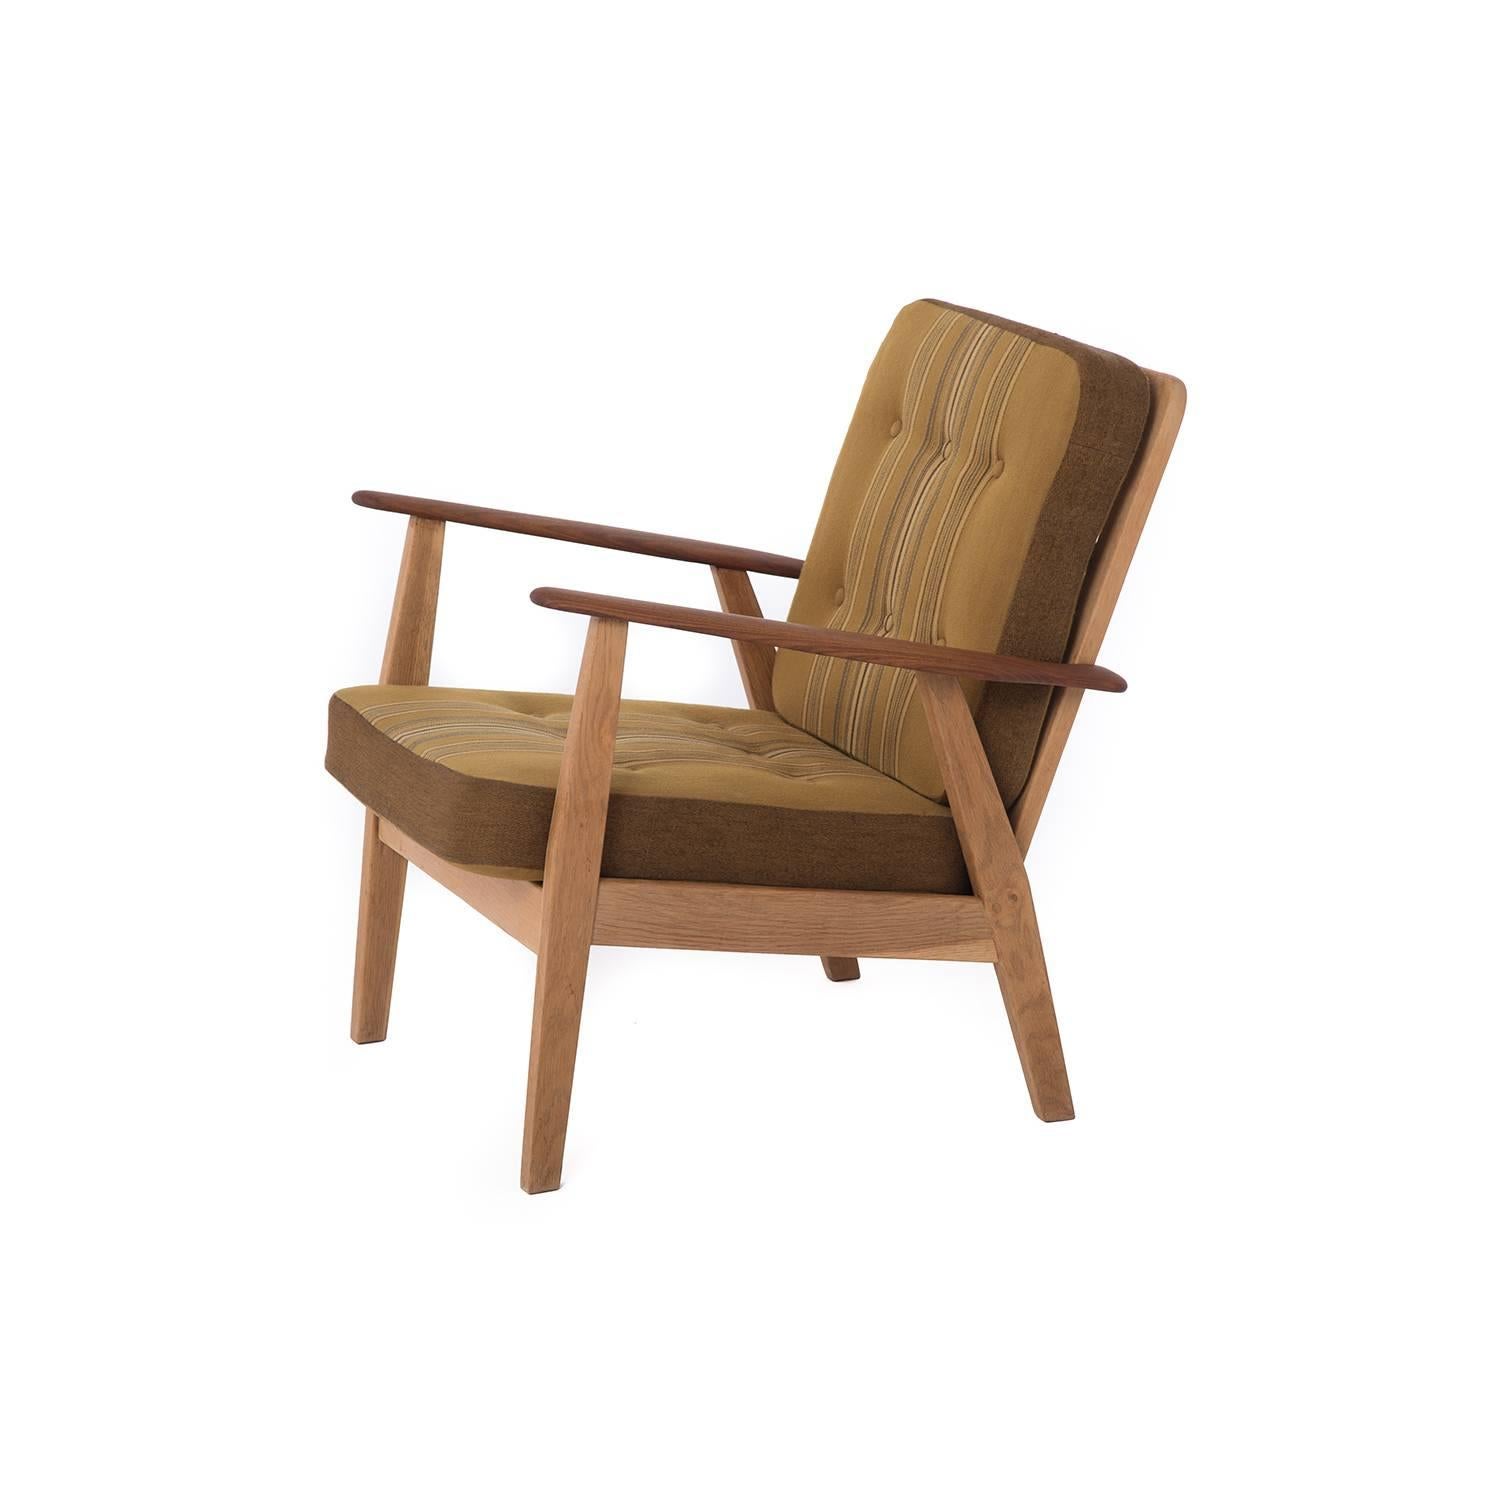 This Danish lounge chair in original vintage upholstery features sculptural teak arms atop a sturdy oak base.